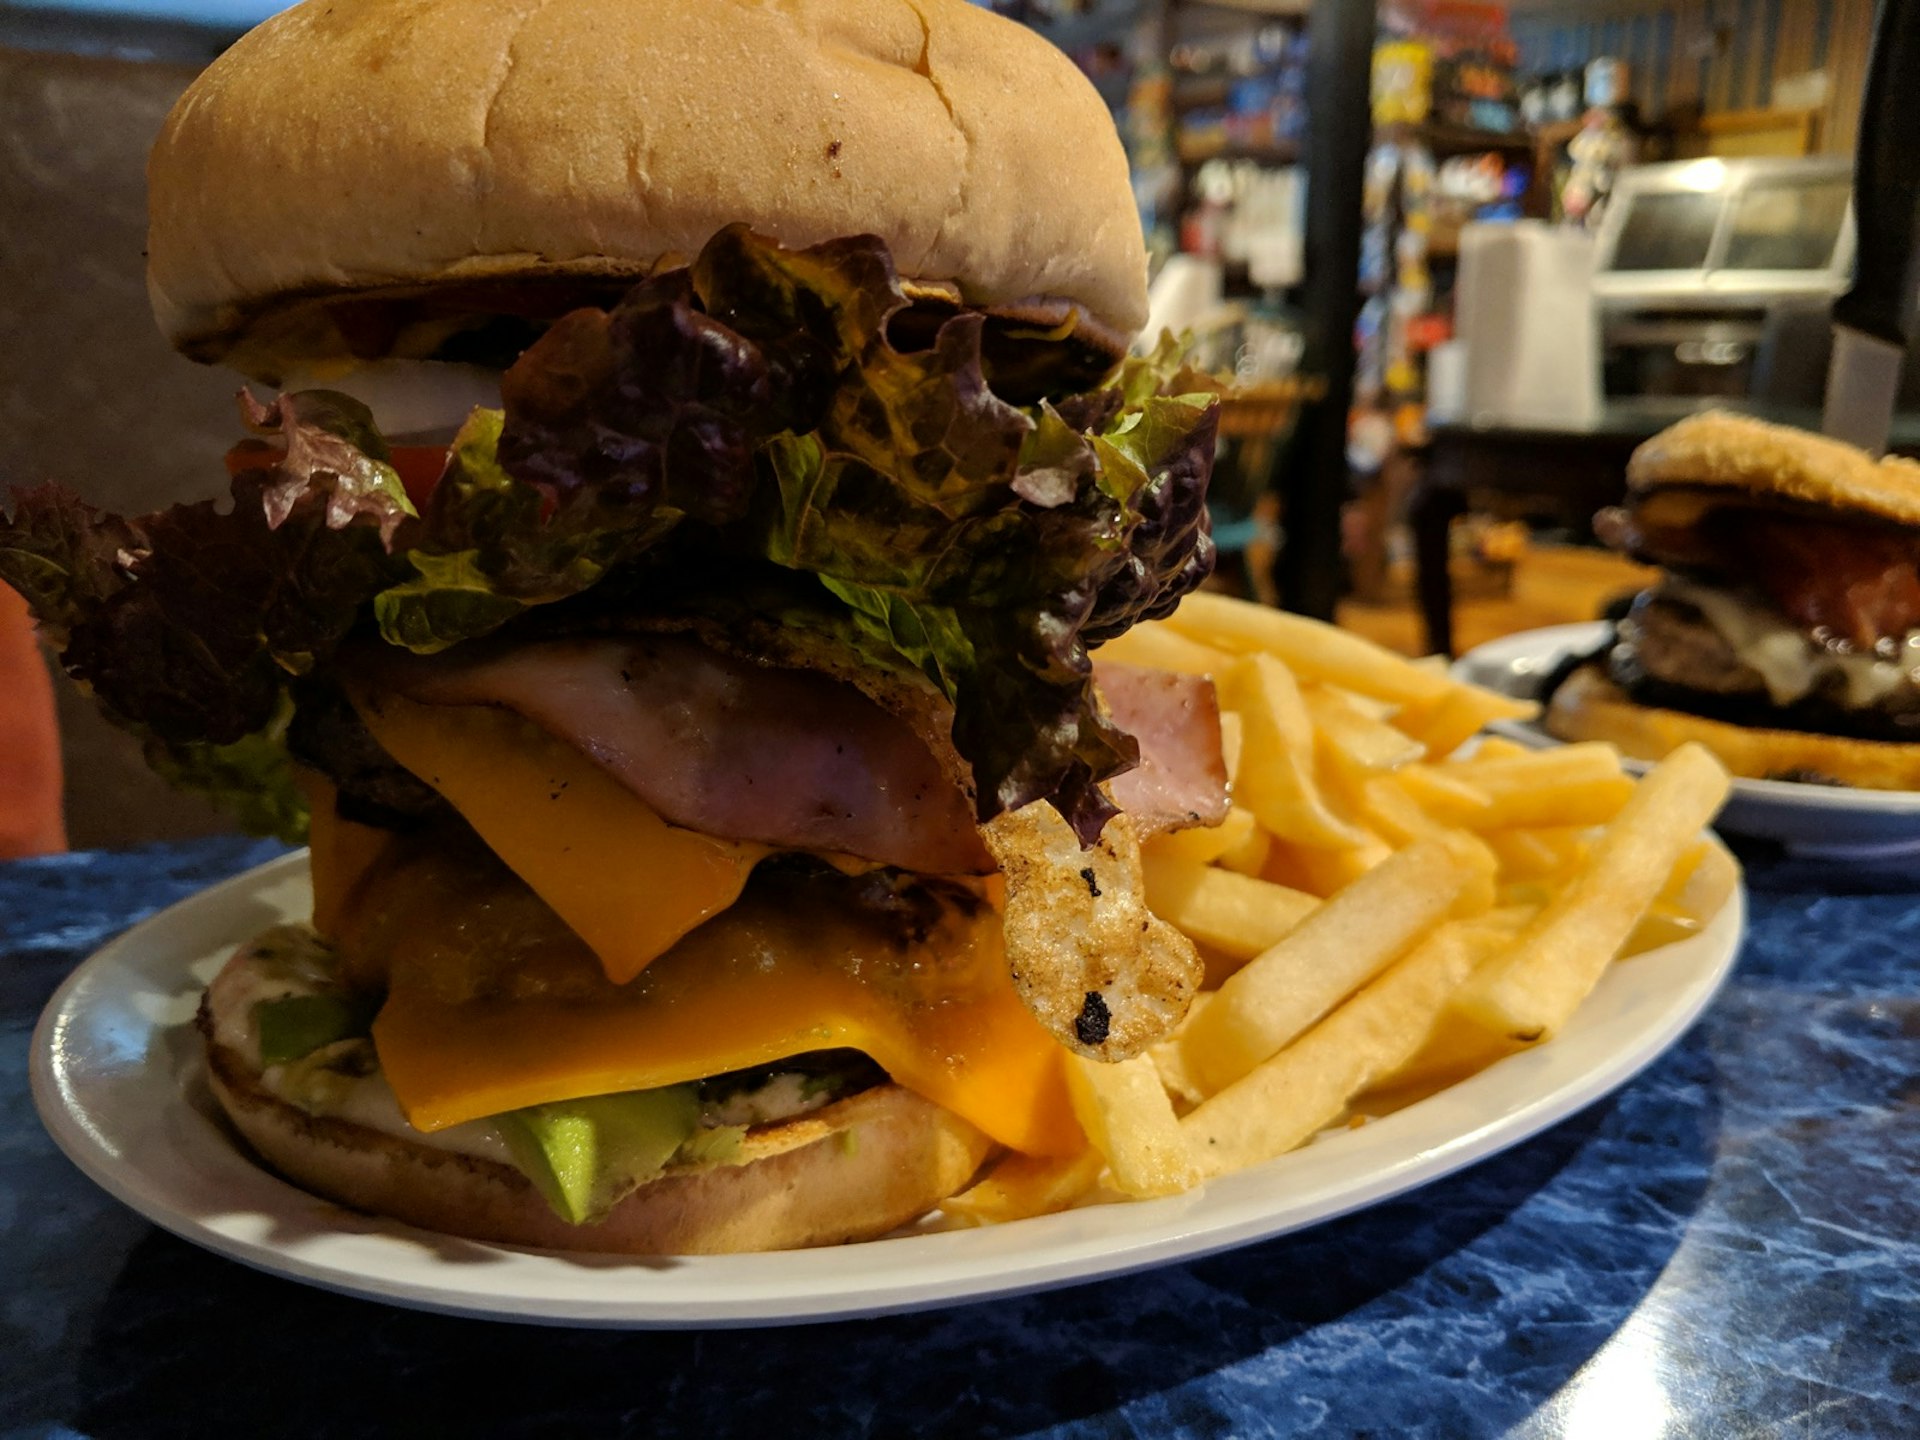 A massive burger is surrounded by fries